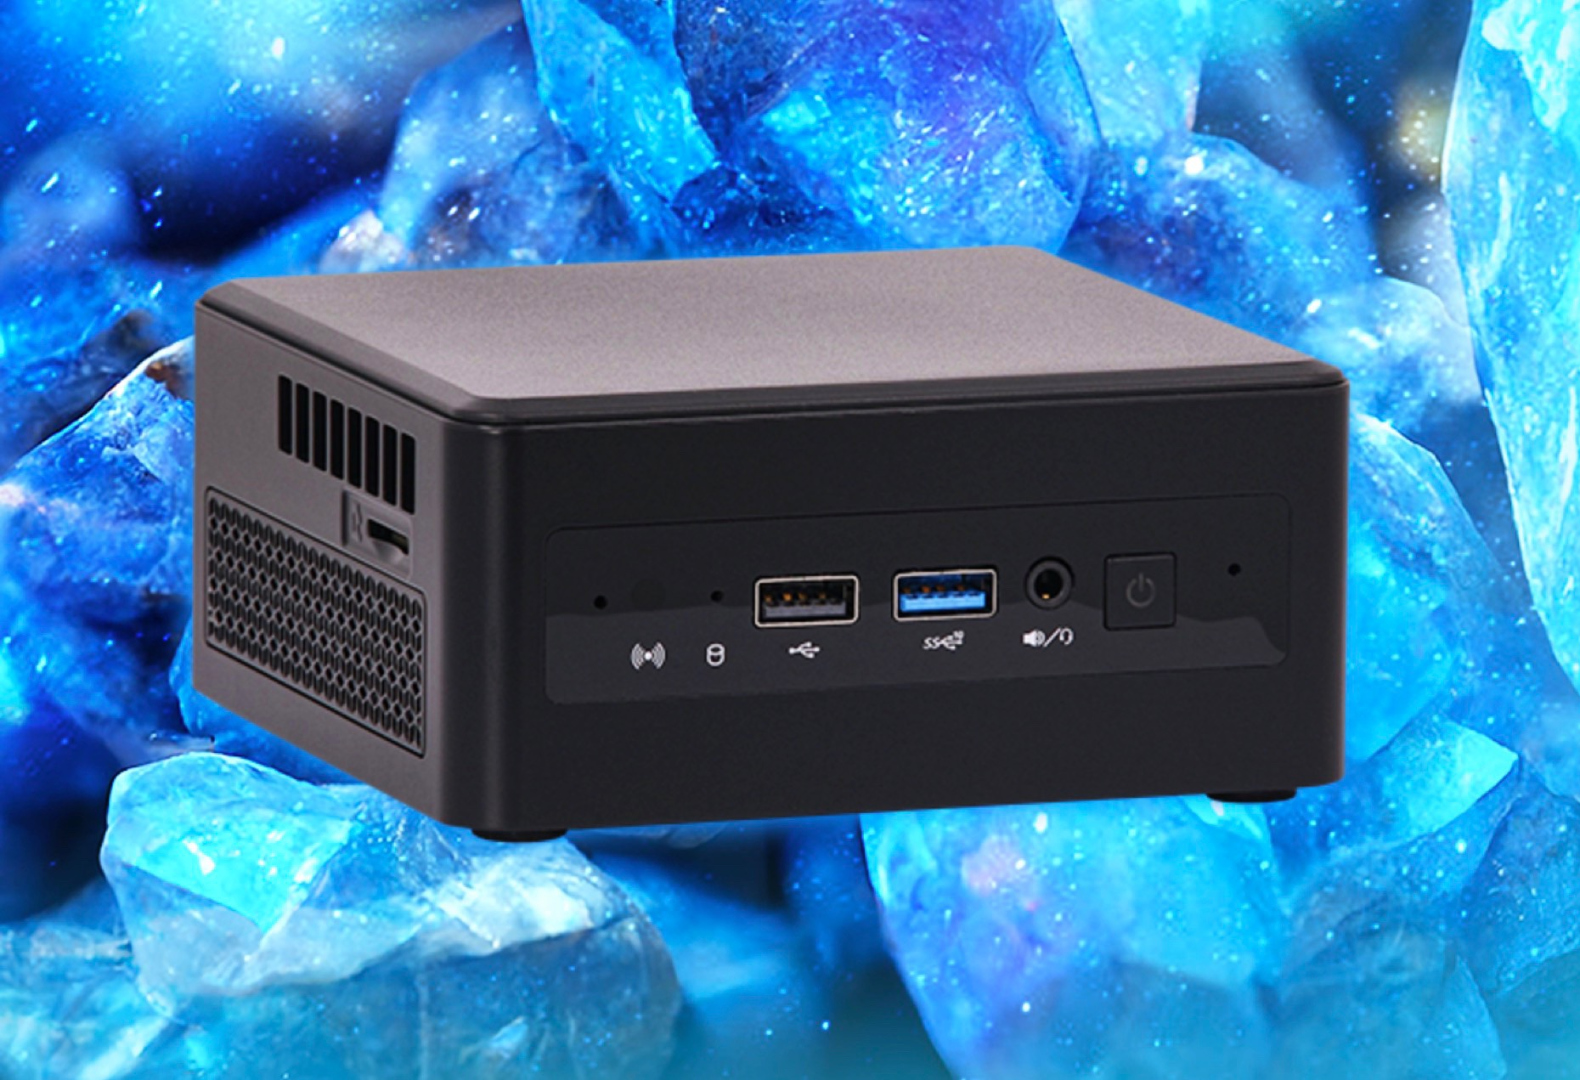 Chatreey AM08 mini PC now available with Ryzen 9 6900HX or Ryzen 7 7735HS  processor options - Liliputing